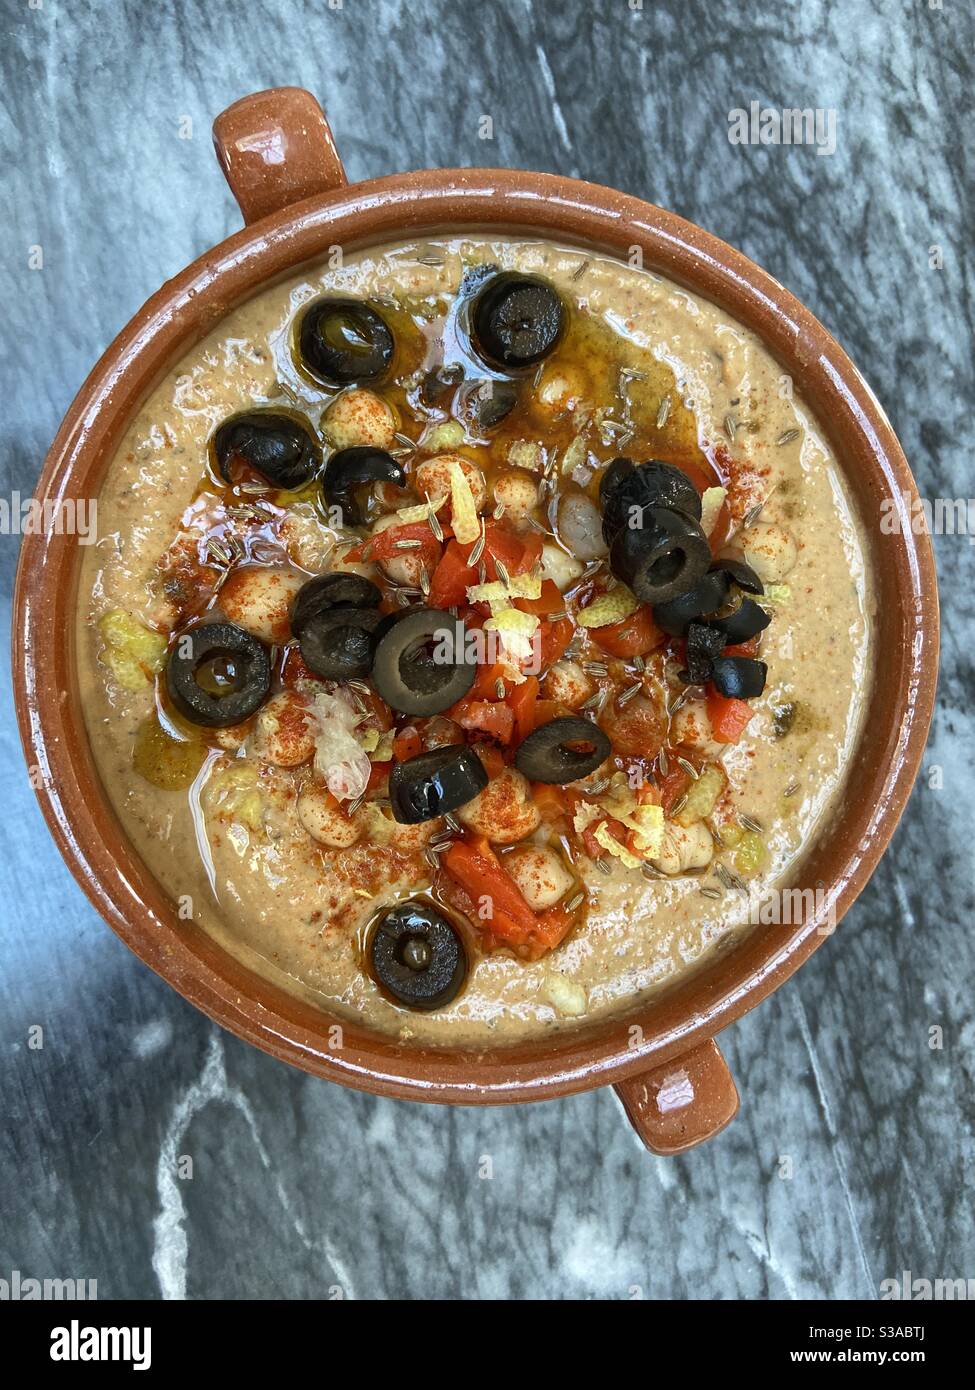 Homemade Humus with olives, roasted peppers, smoked paprika, and lemon zest. Stock Photo